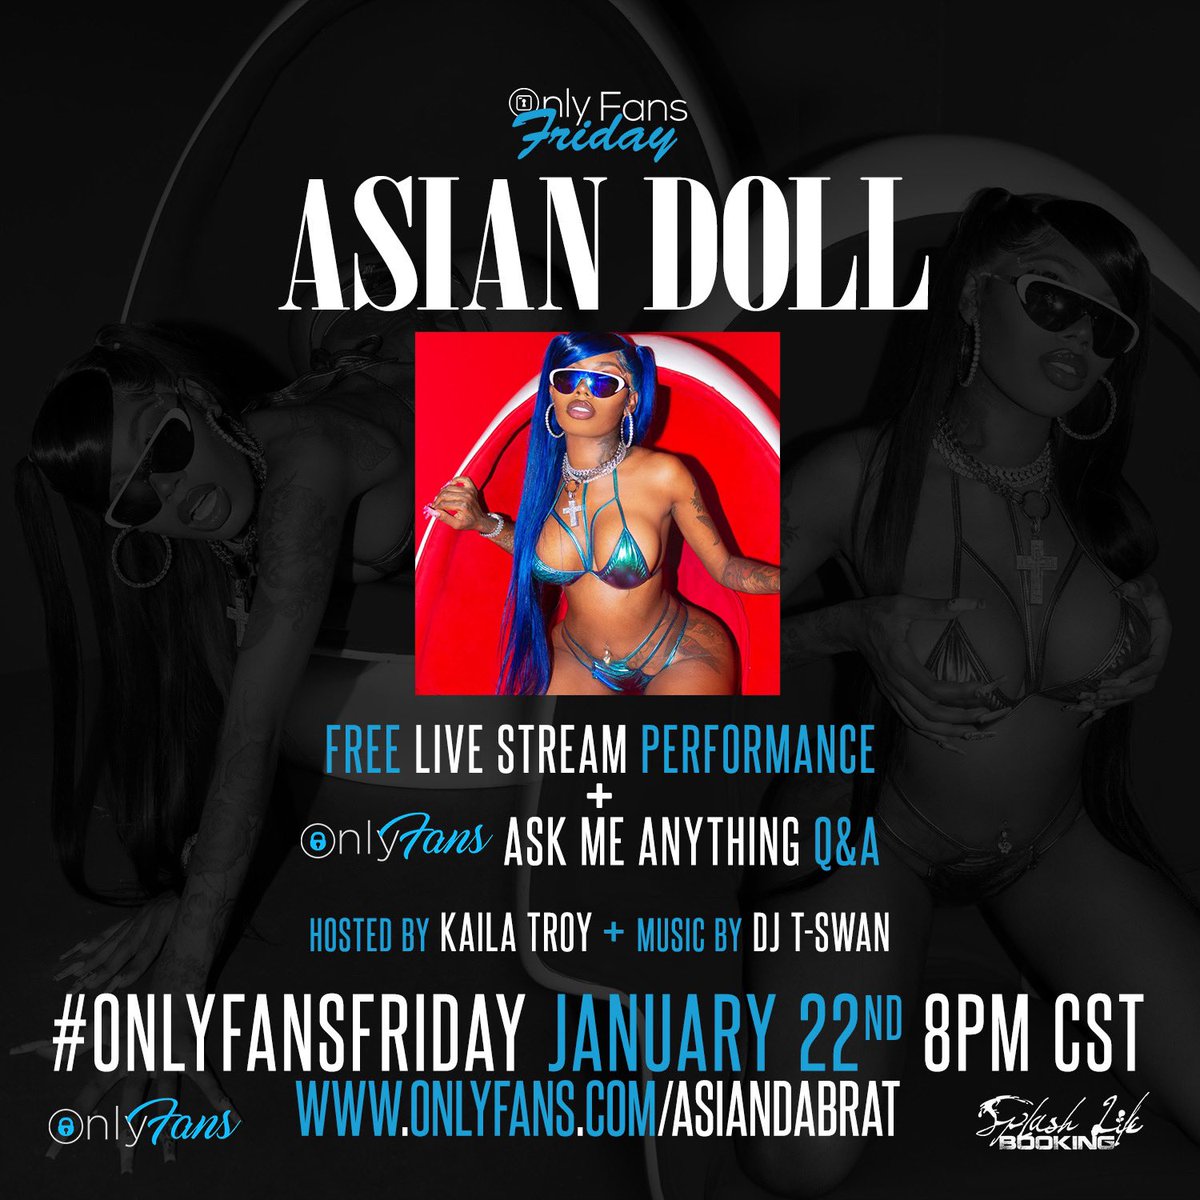 Asian doll onlyfans